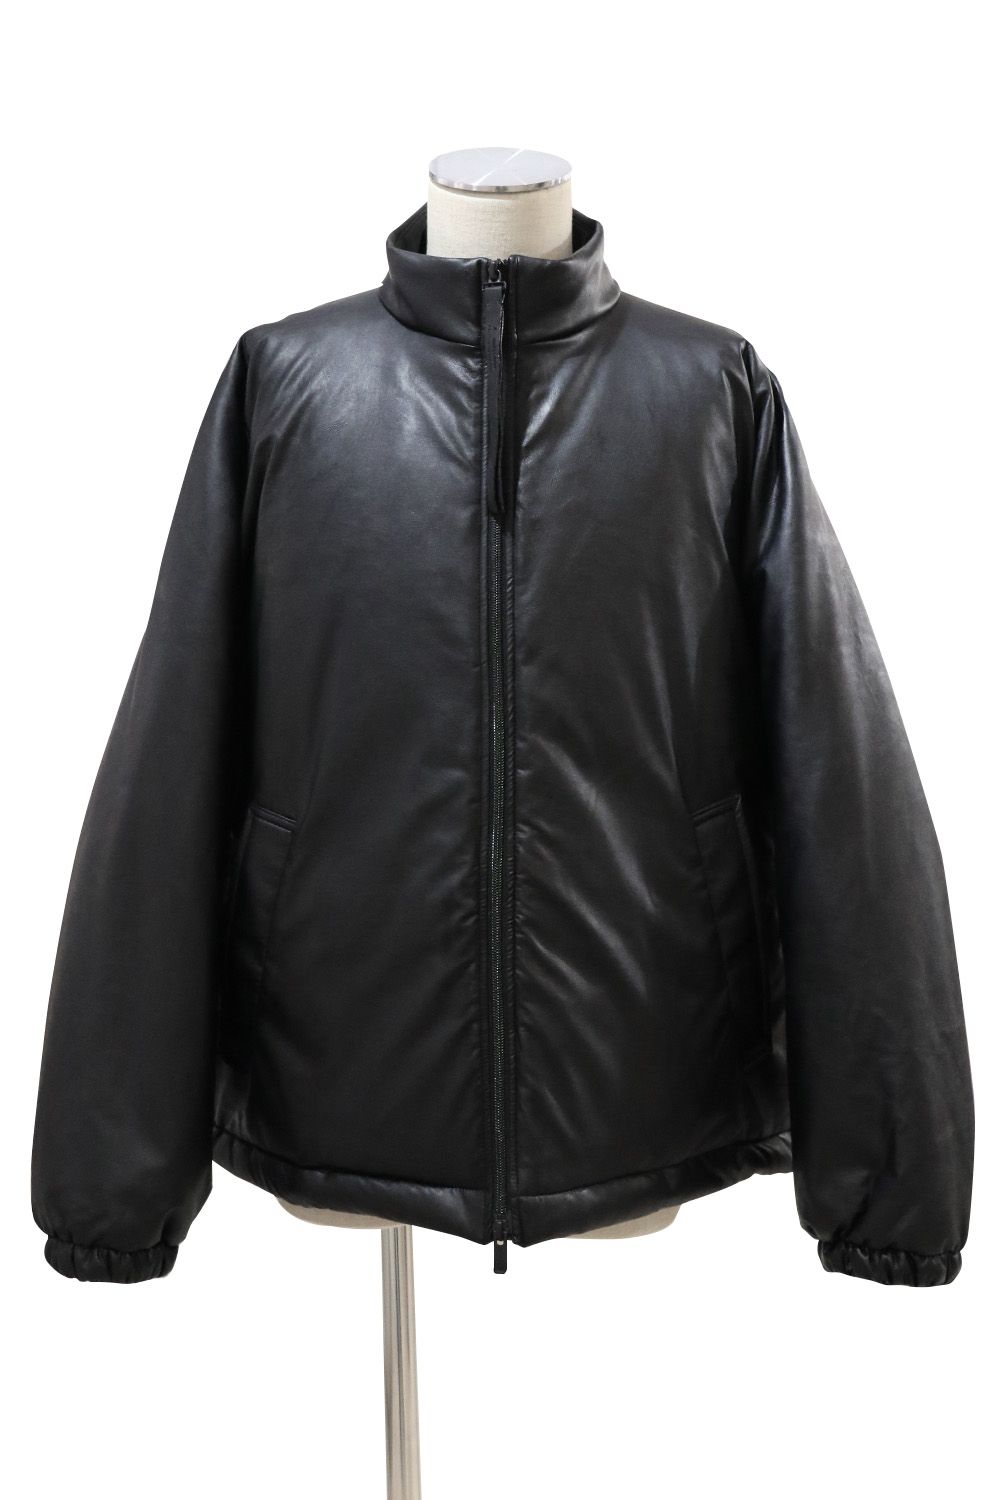 N.HOOLYWOOD - N.HOOLYWOOD COMPILE STAND COLLAR BLOUSON / エヌ